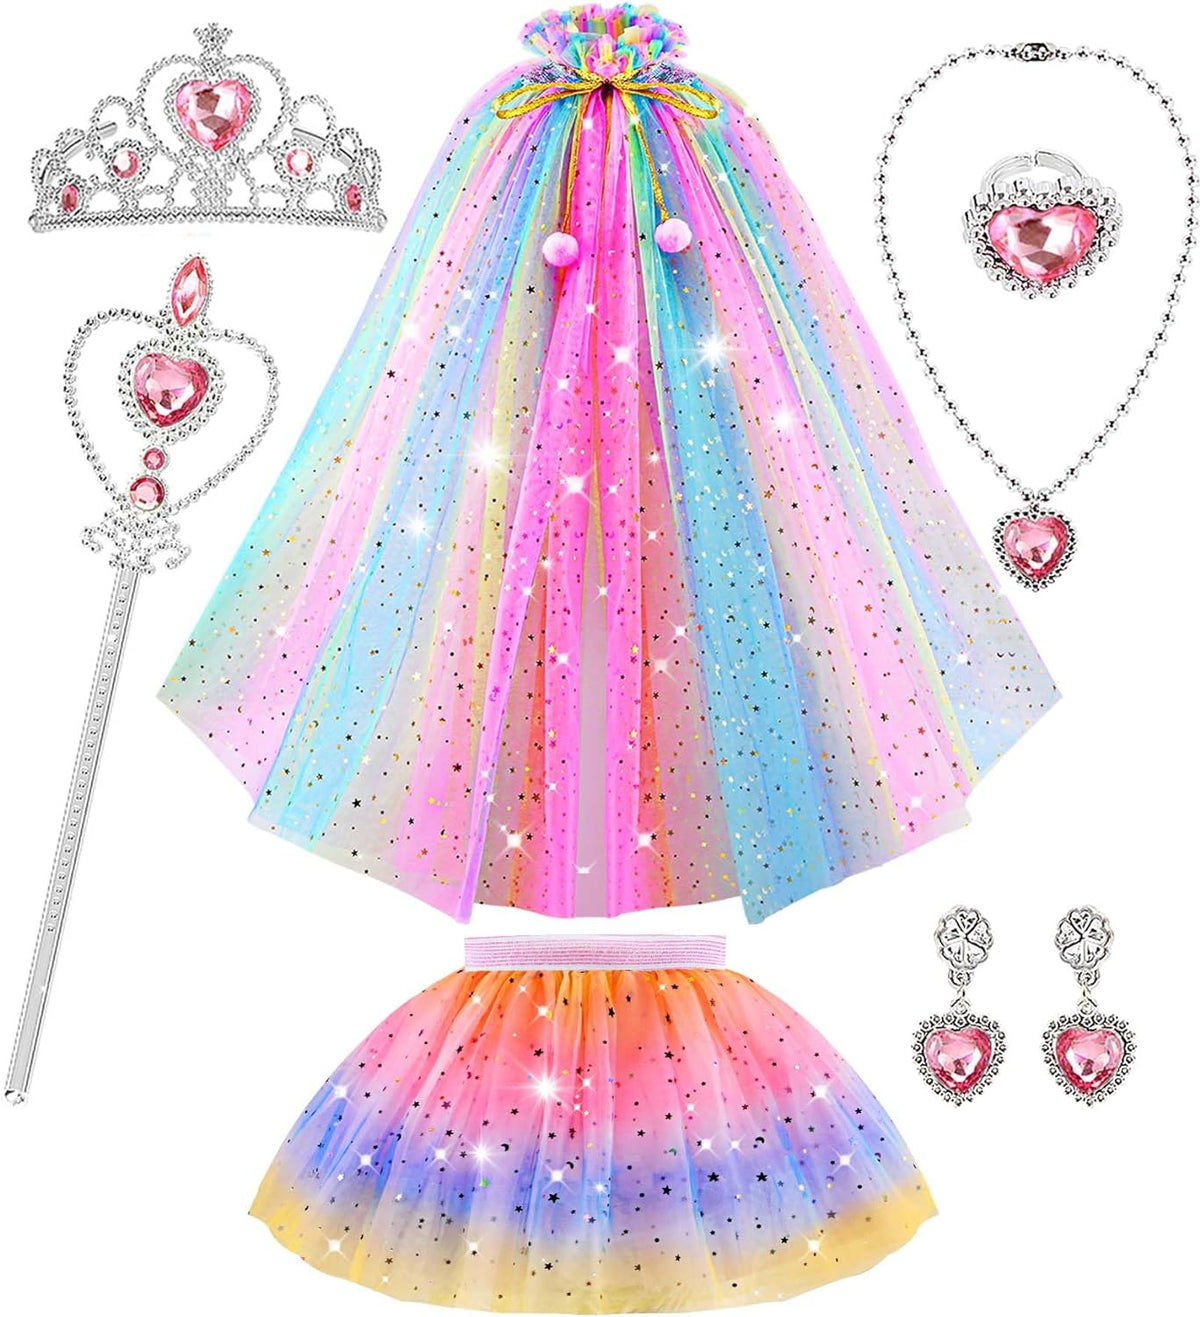 Princess Dresses for Girls 3 - 8 Years,Princess Dress Up Clothes Cape Skirt Toys